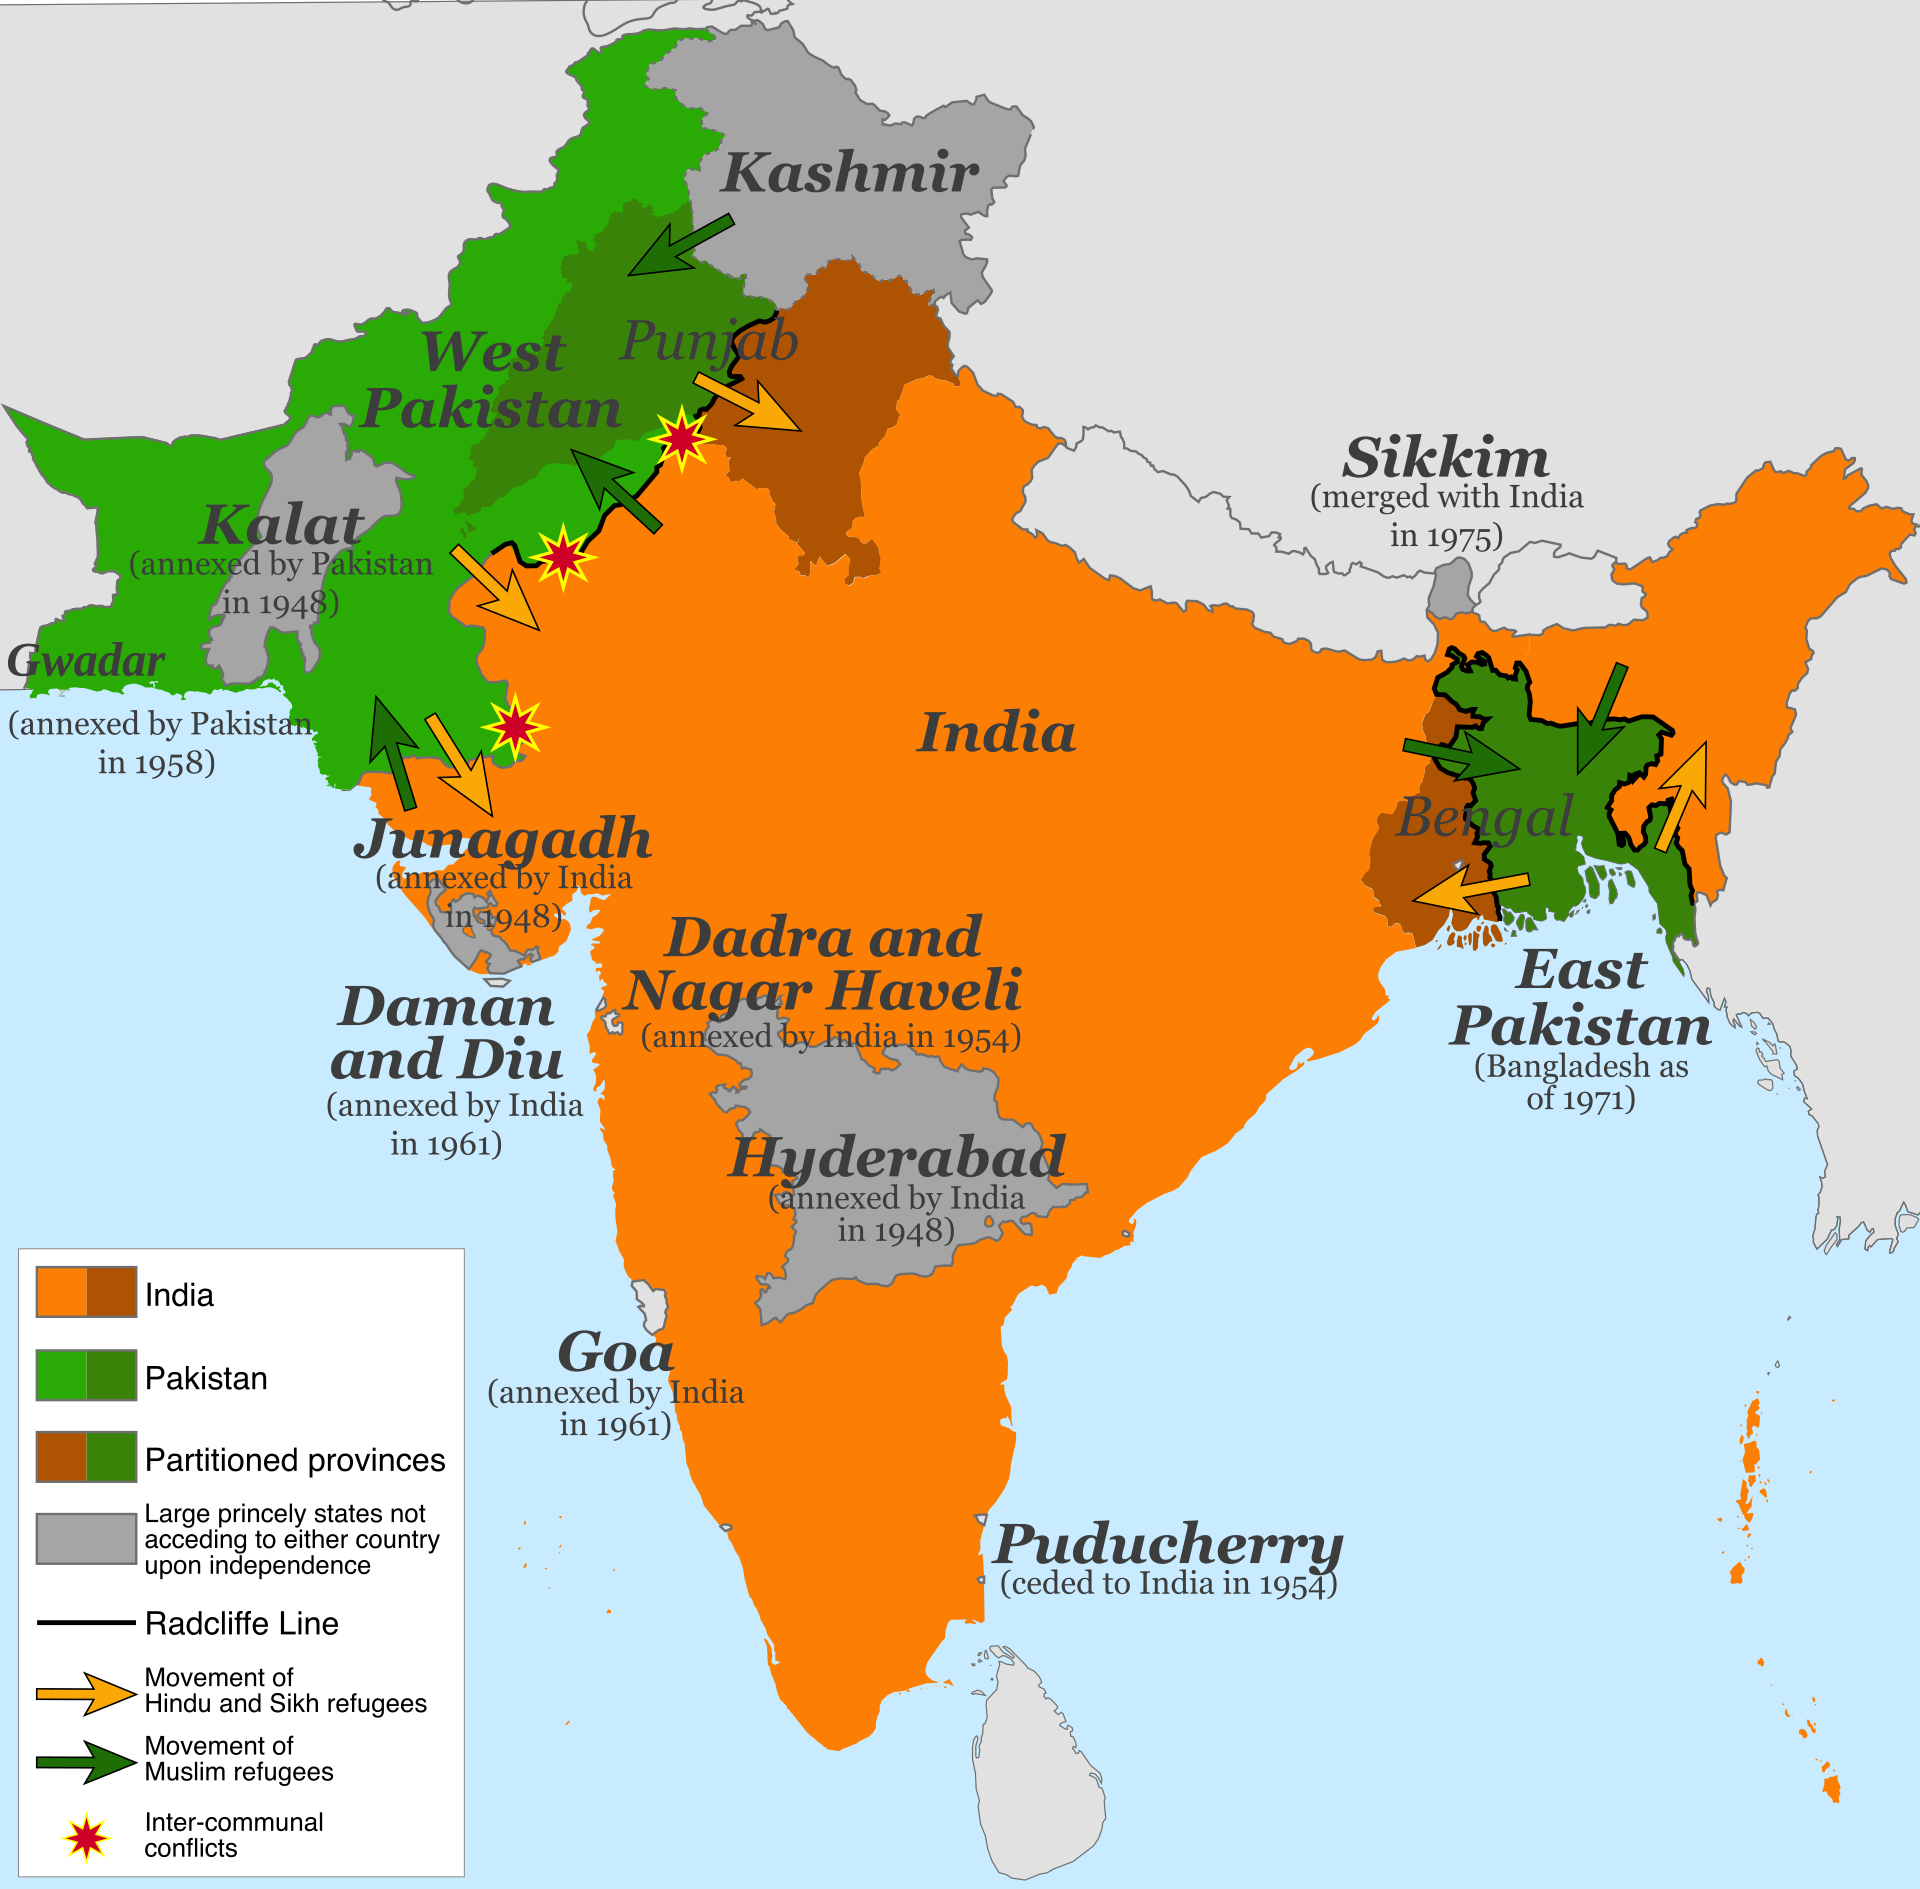 A map of India and surrounding areas; India is depicted in orange, with West Pakistan and East Pakistan in green, while Hyderabad, Kalat, and Kashmir are in grey.